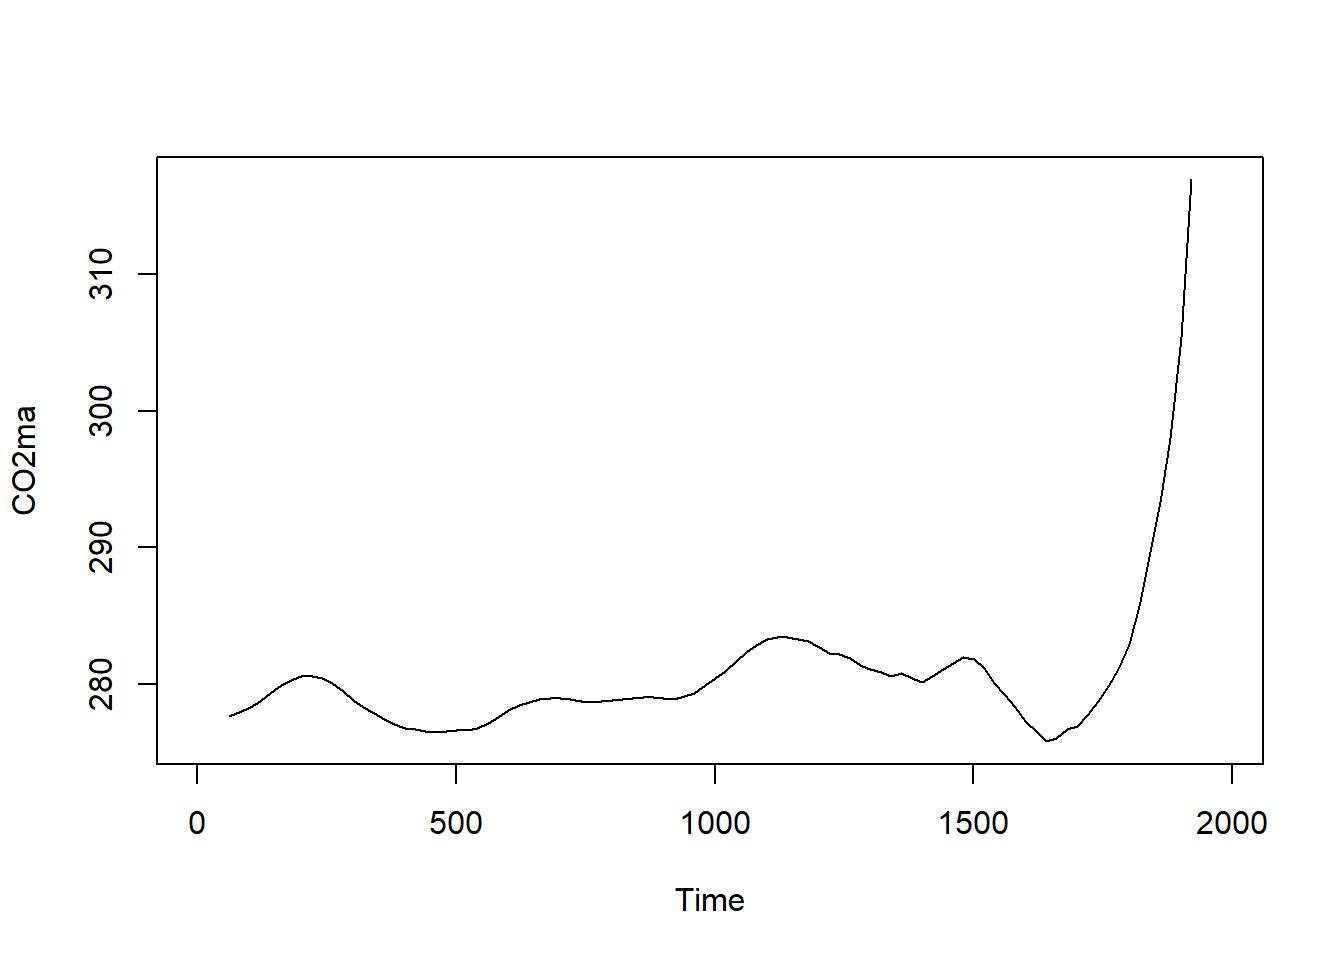 Moving average (order=7) of CO2 time series